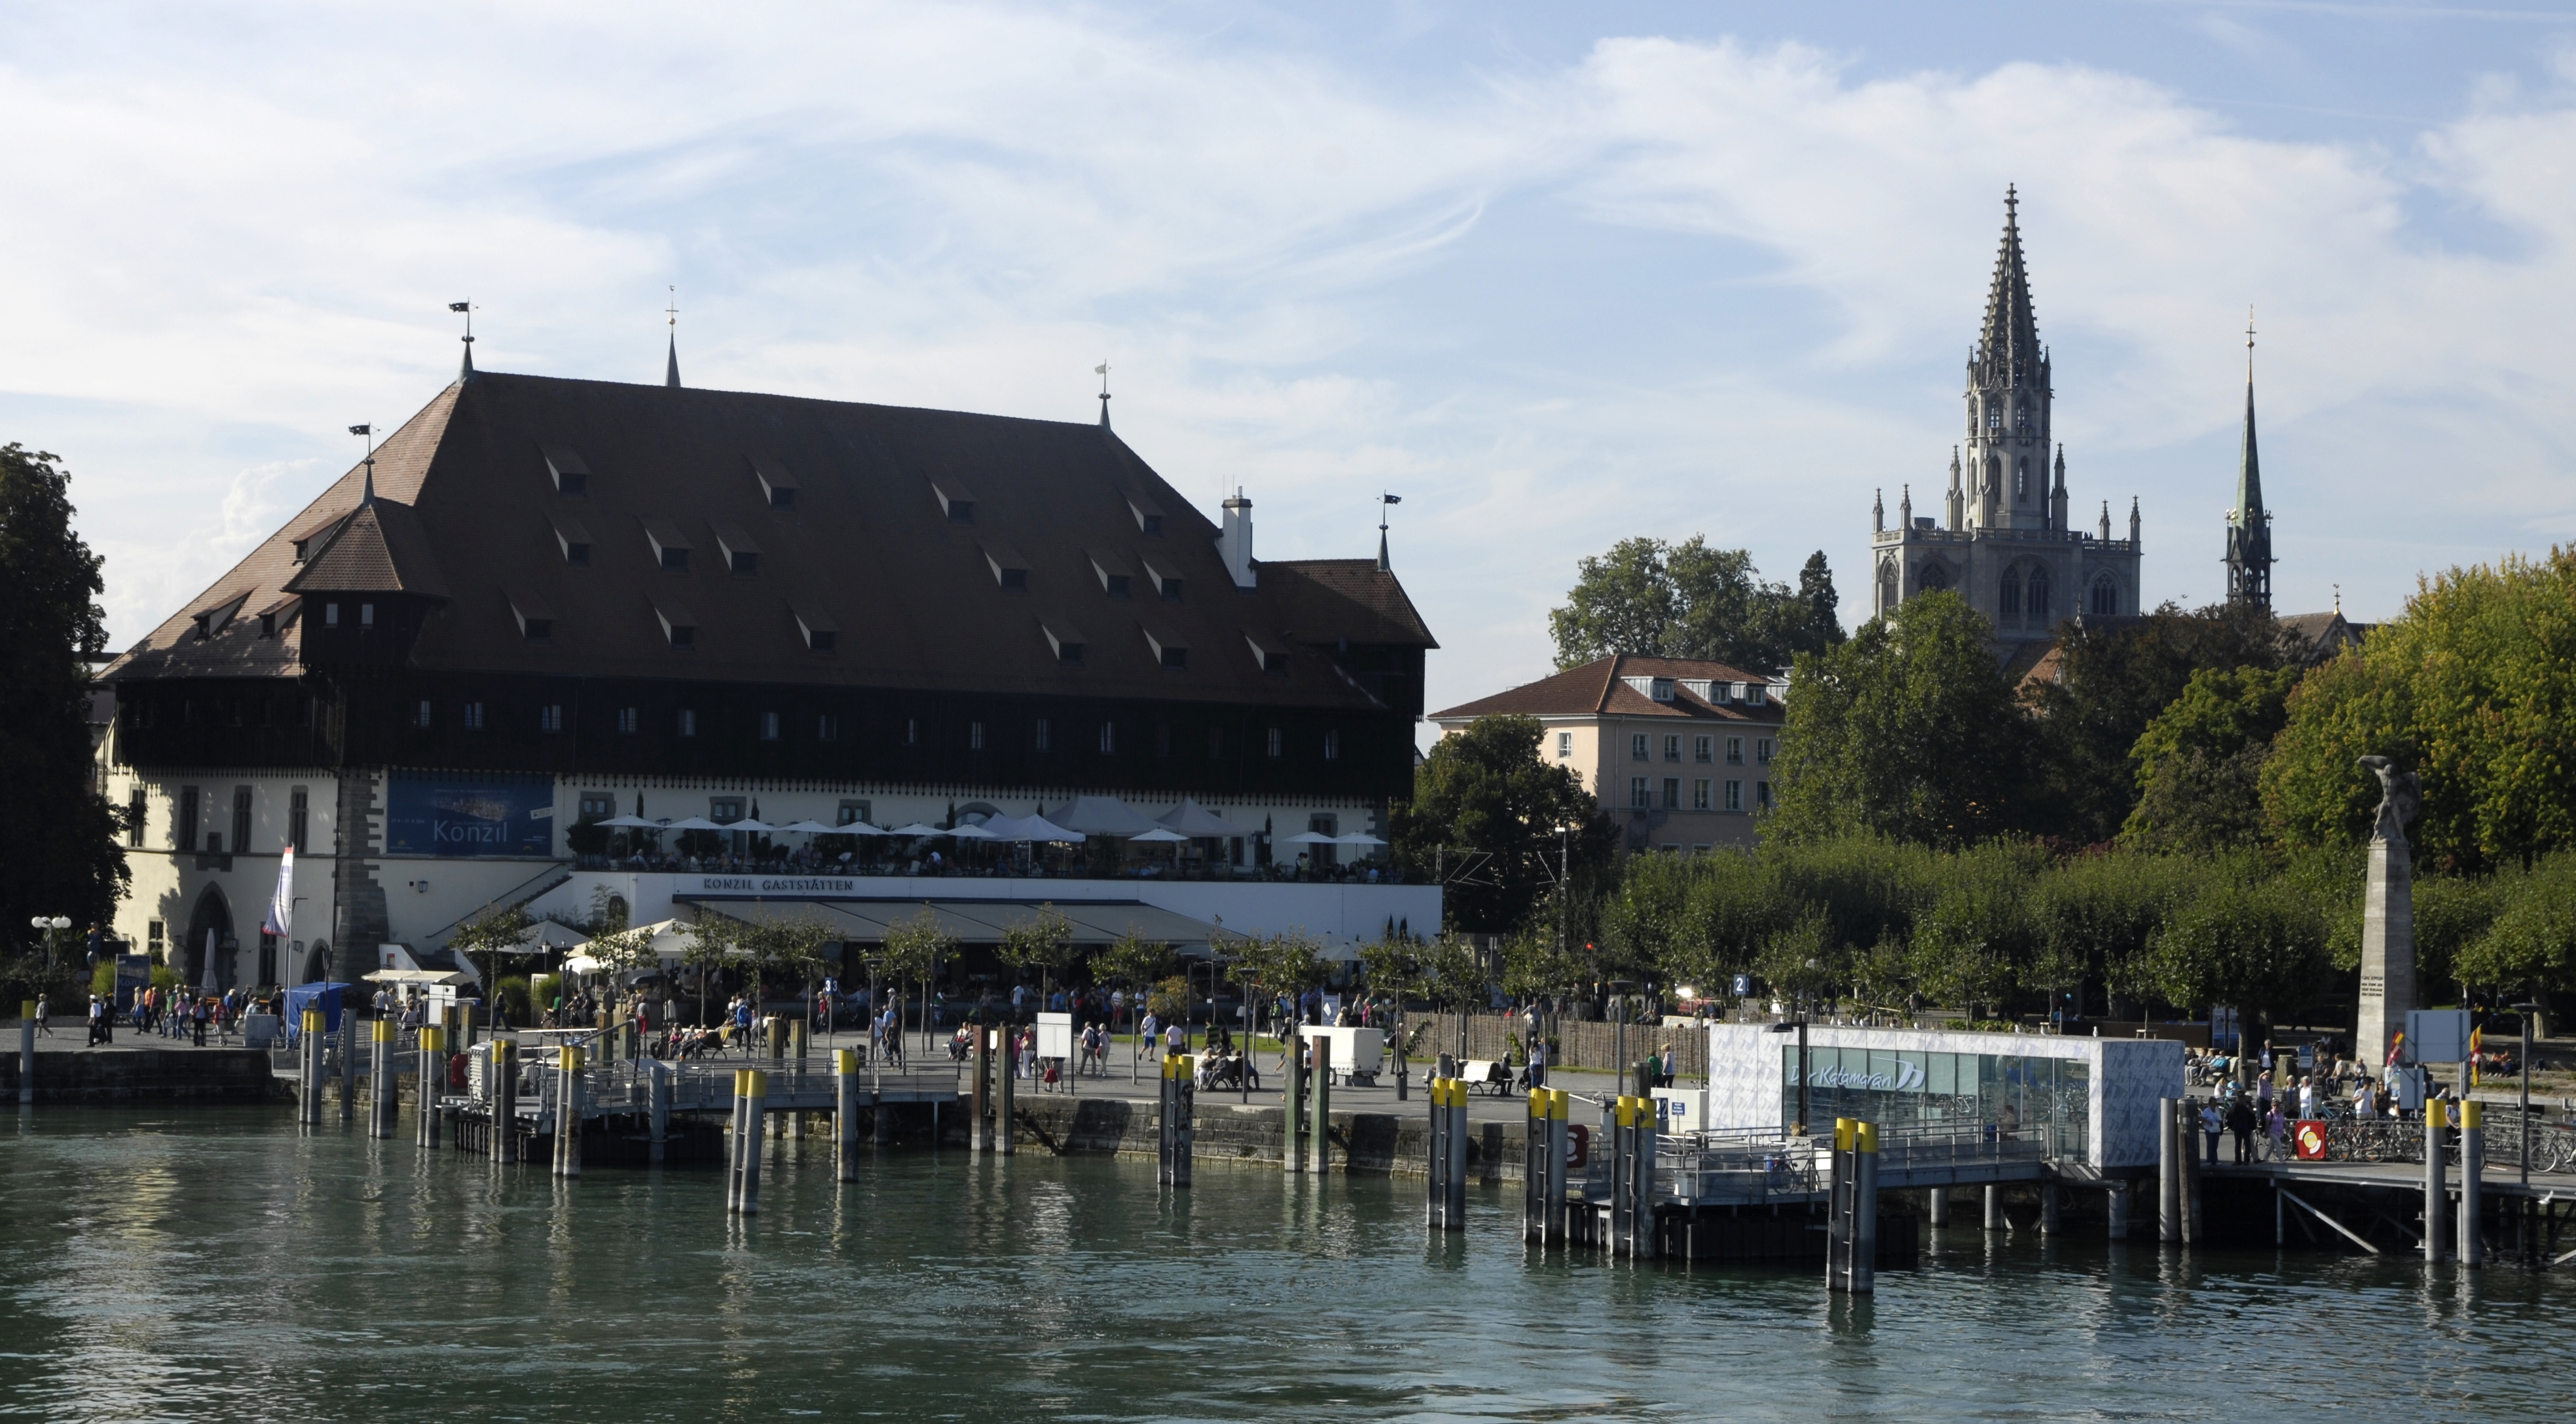 Das Konzil in Konstanz -- By Varus111 (Own work) [CC BY-SA 4.0 (http://creativecommons.org/licenses/by-sa/4.0)], via Wikimedia Commons